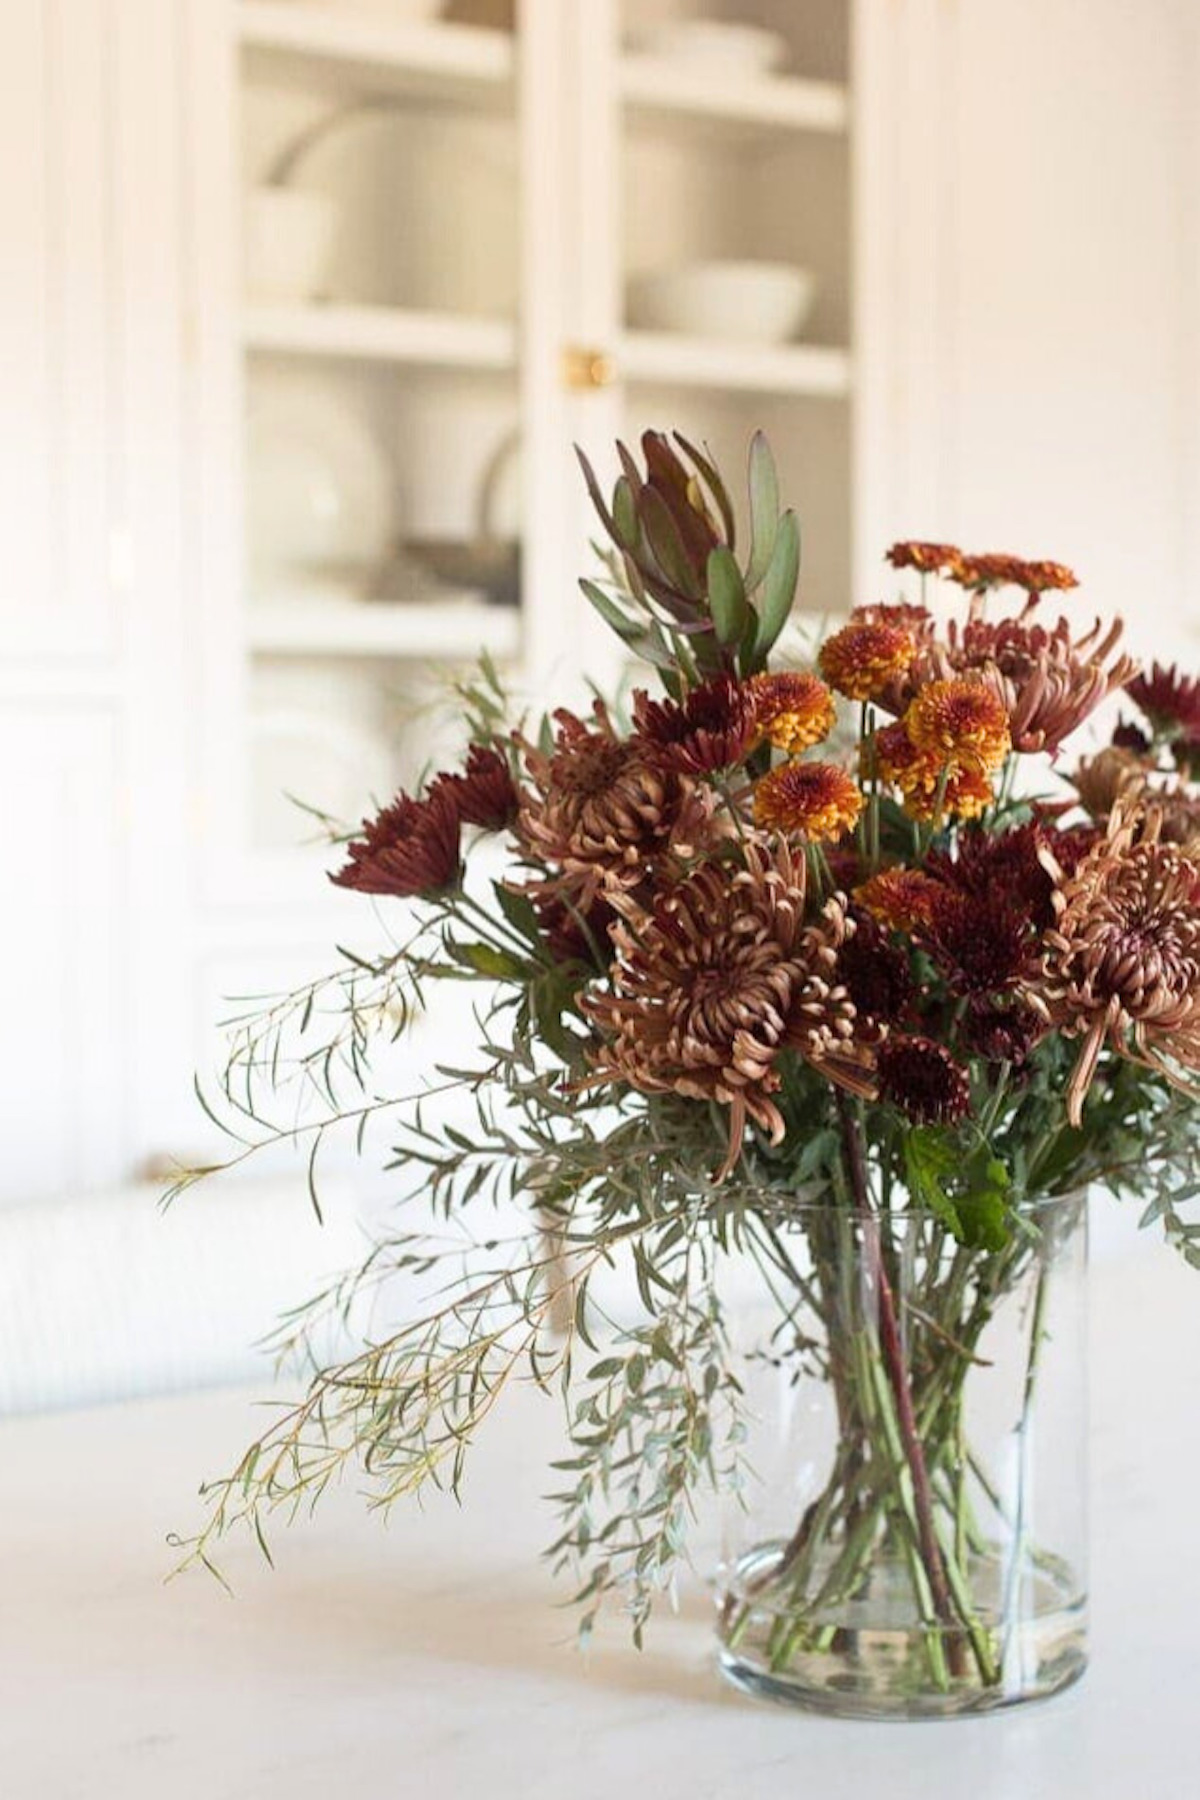 A Thanksgiving centerpiece of flowers on a table in a kitchen.